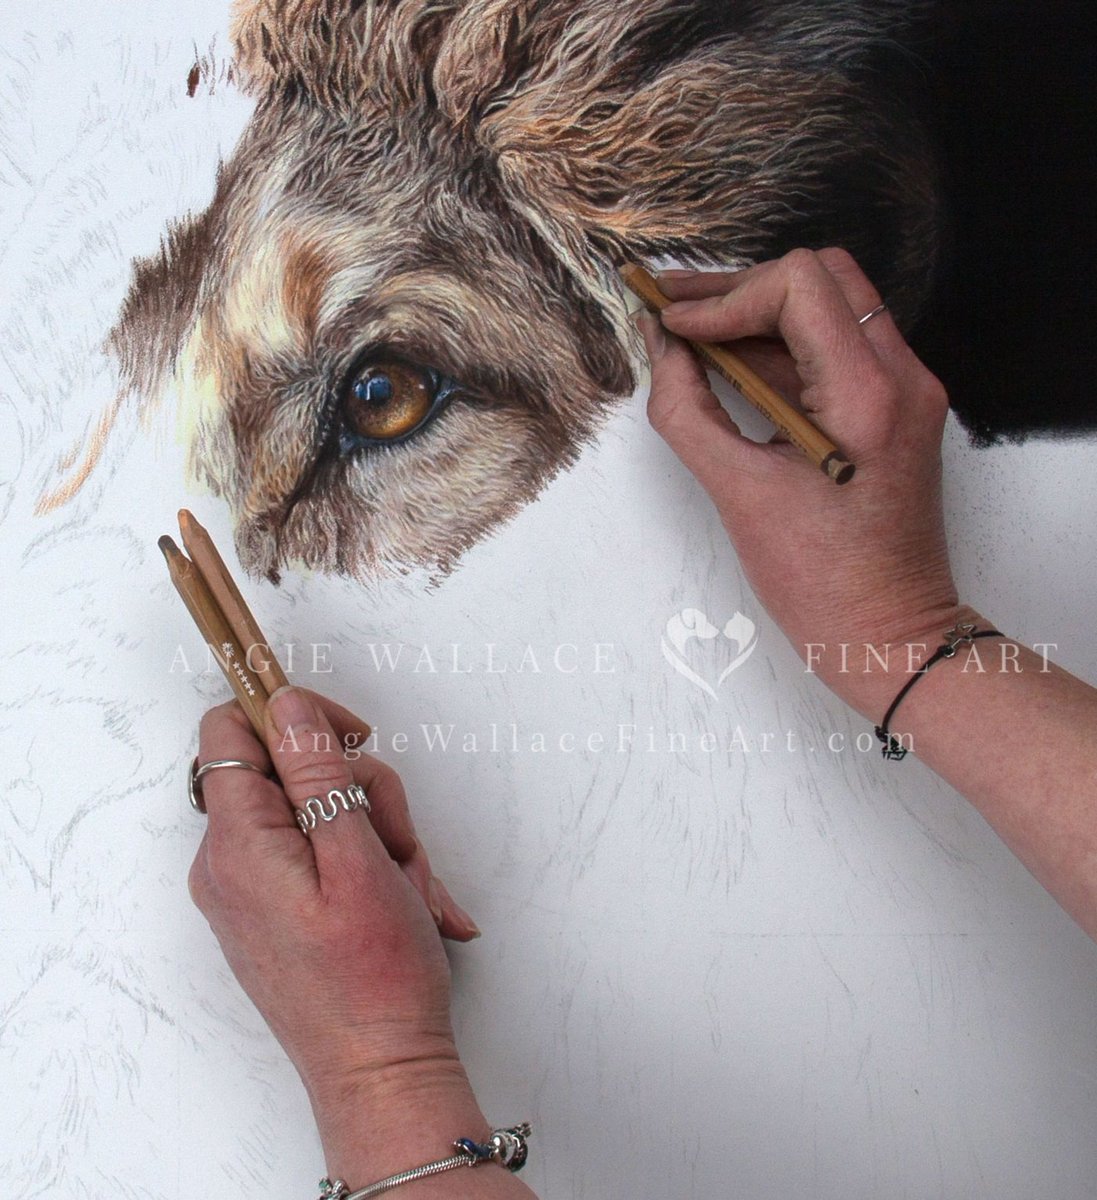 Thank you everyone who had a guess at this mornings eye picture. Well done those who guessed it's a Lion 🦁 I've been so excited to get started on this piece for so long. This will be one of my largest works. Hope you like him so far. #lion #bigcat #pastelportrait #drawing